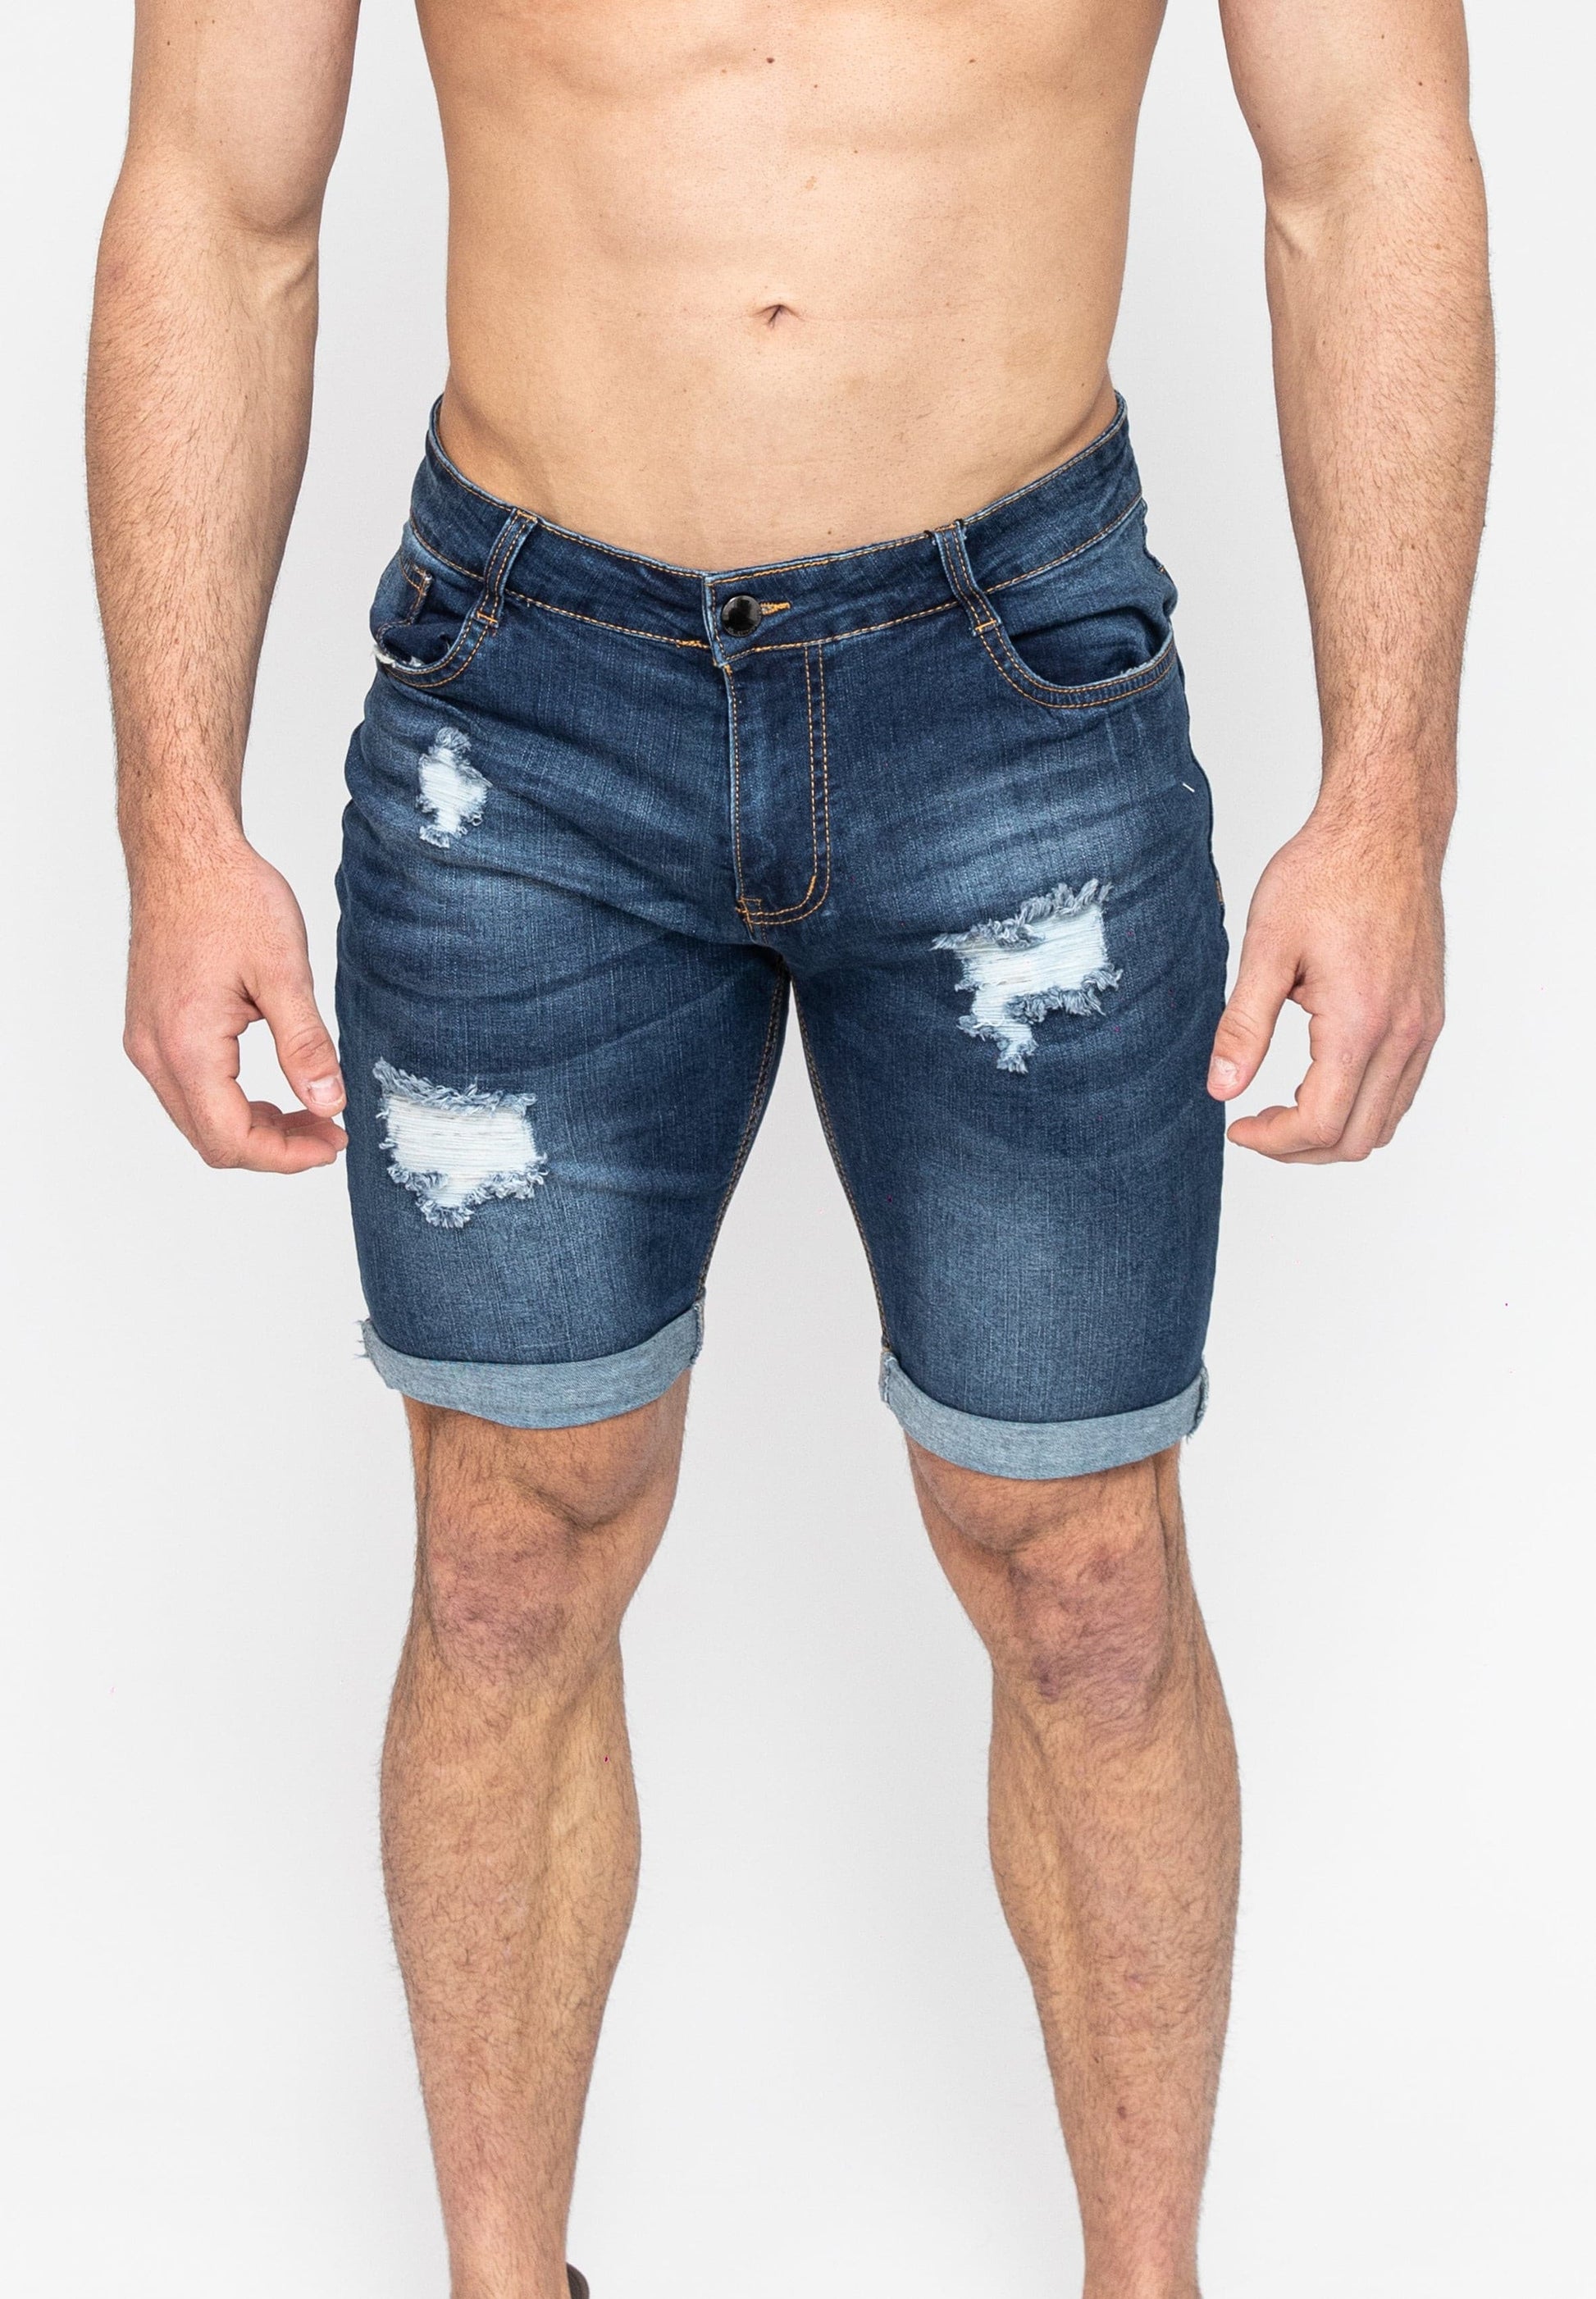 Blue Ripped Skinny Men's Jeans Shorts Front